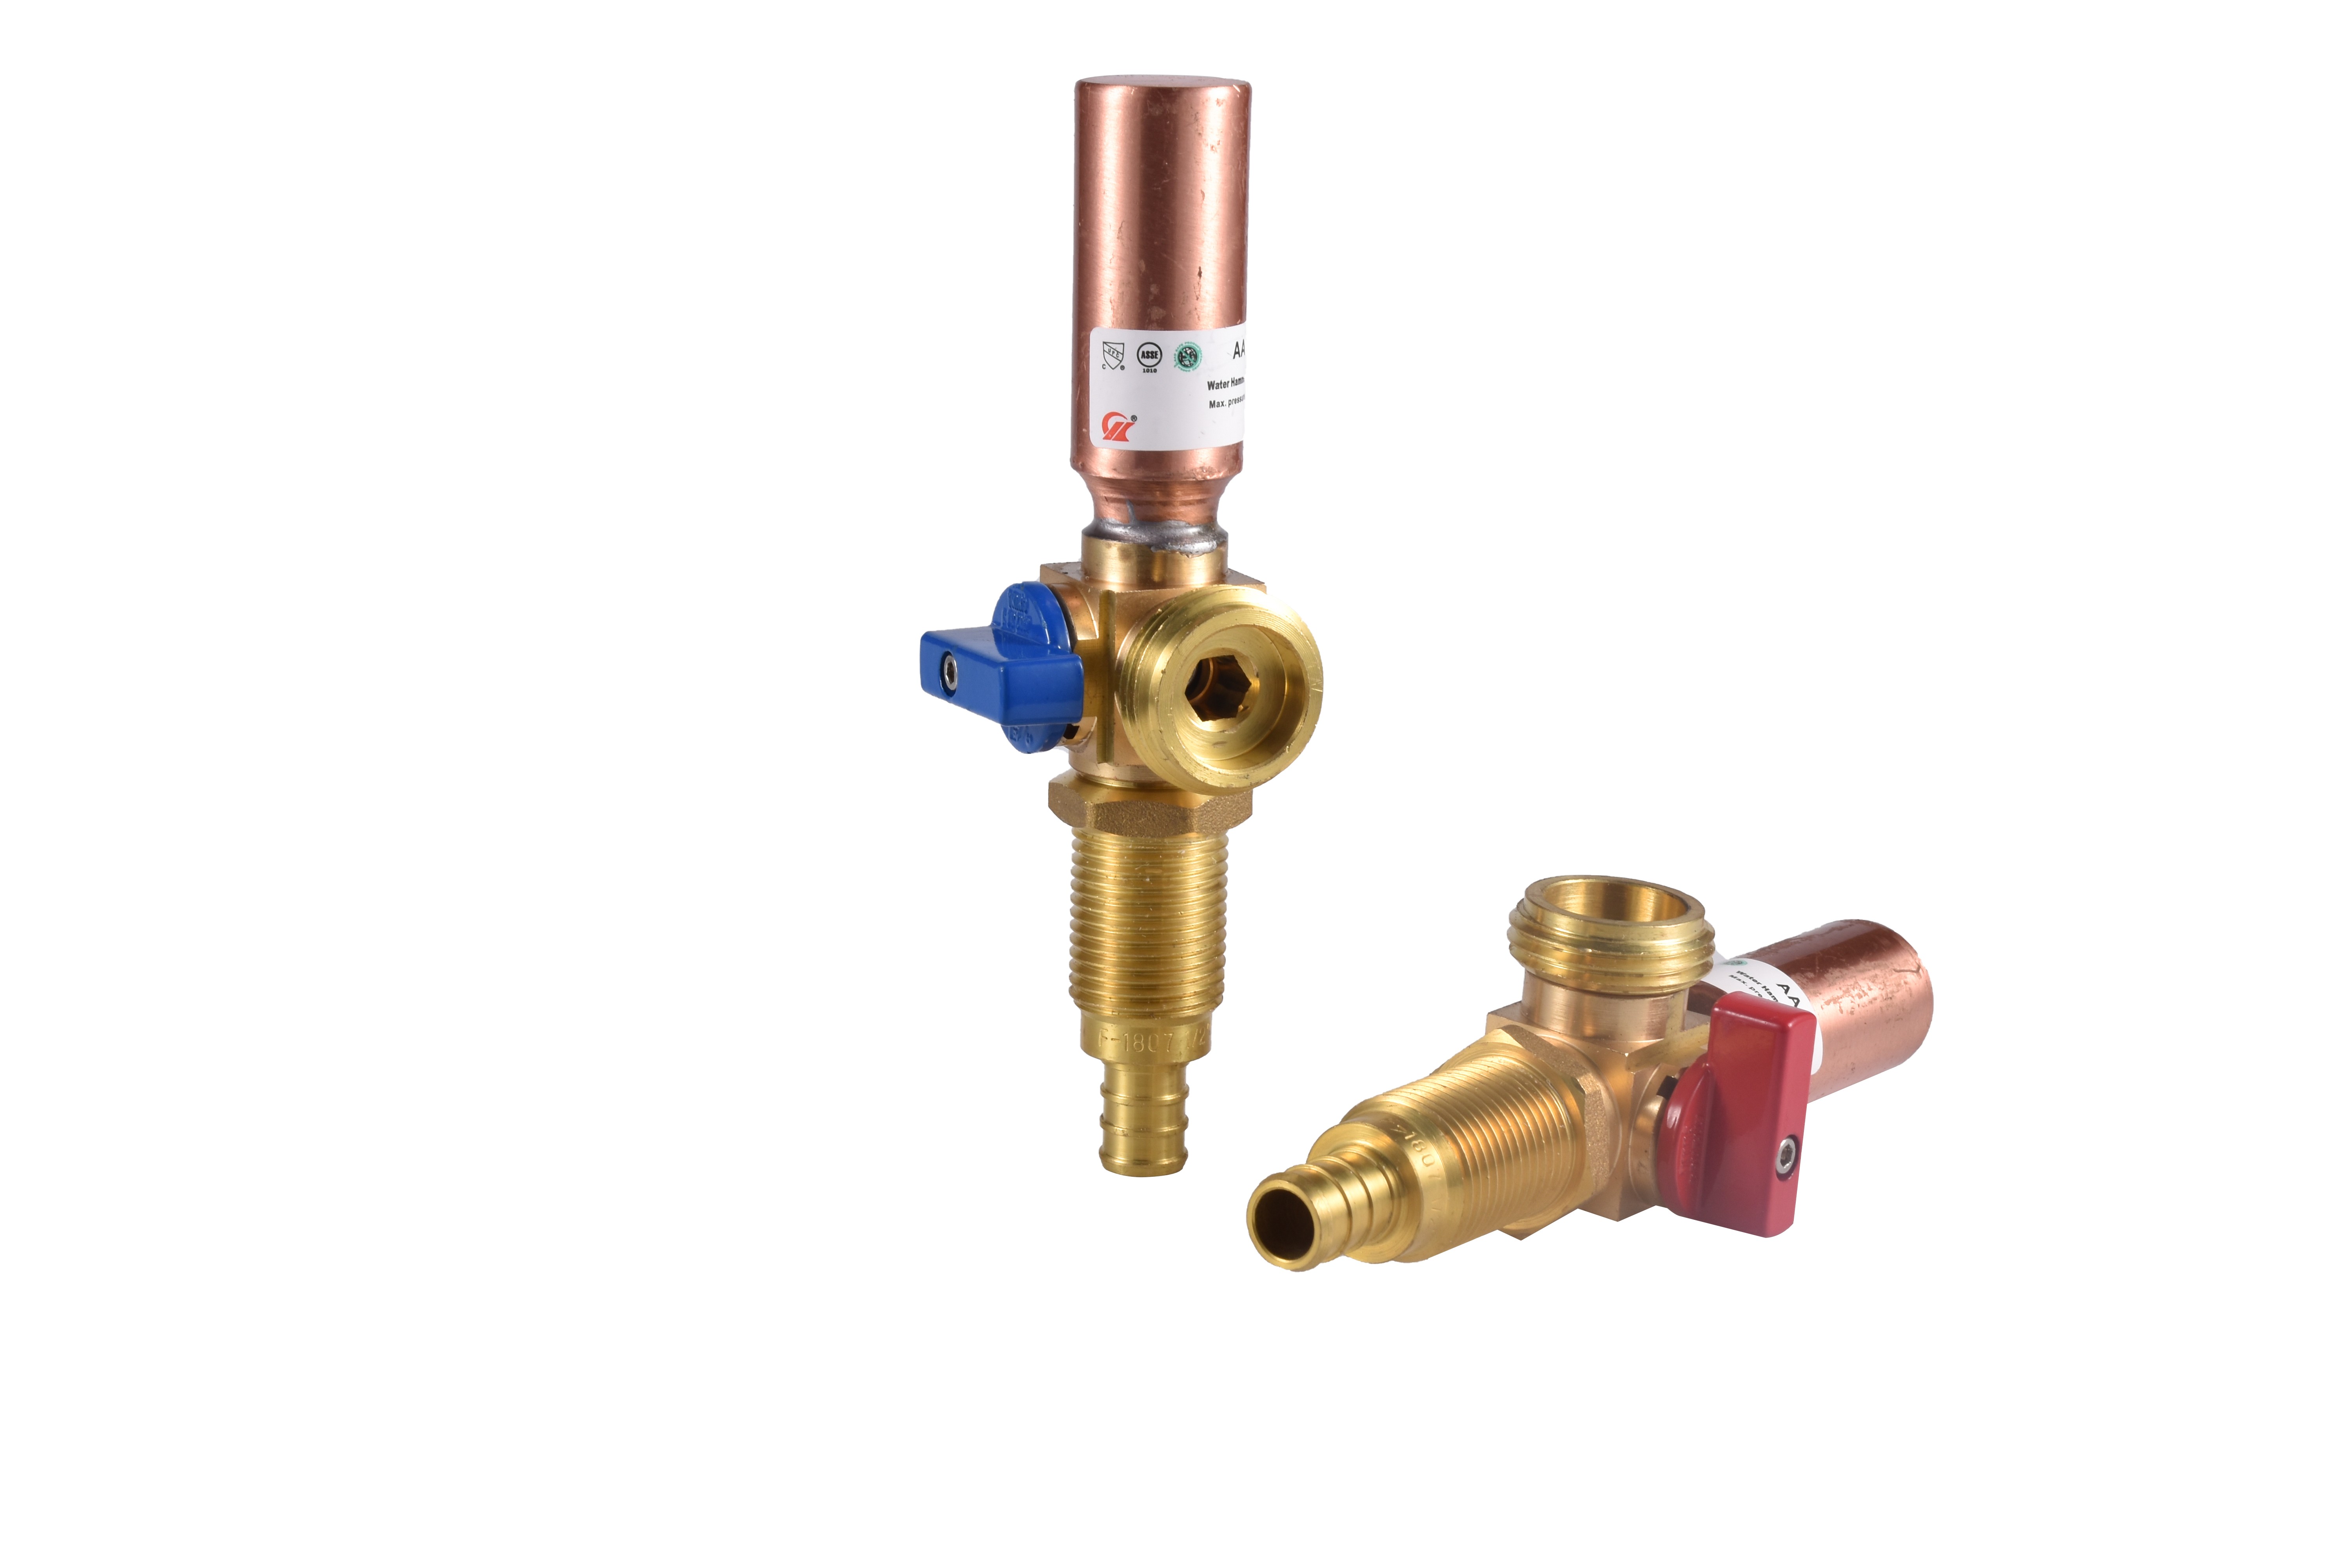 Valve with Copper Water Hammer Arrester 1/2" F-1807 Crimp Pex  x 3/4" MHT Left Blue and Right Red Handle